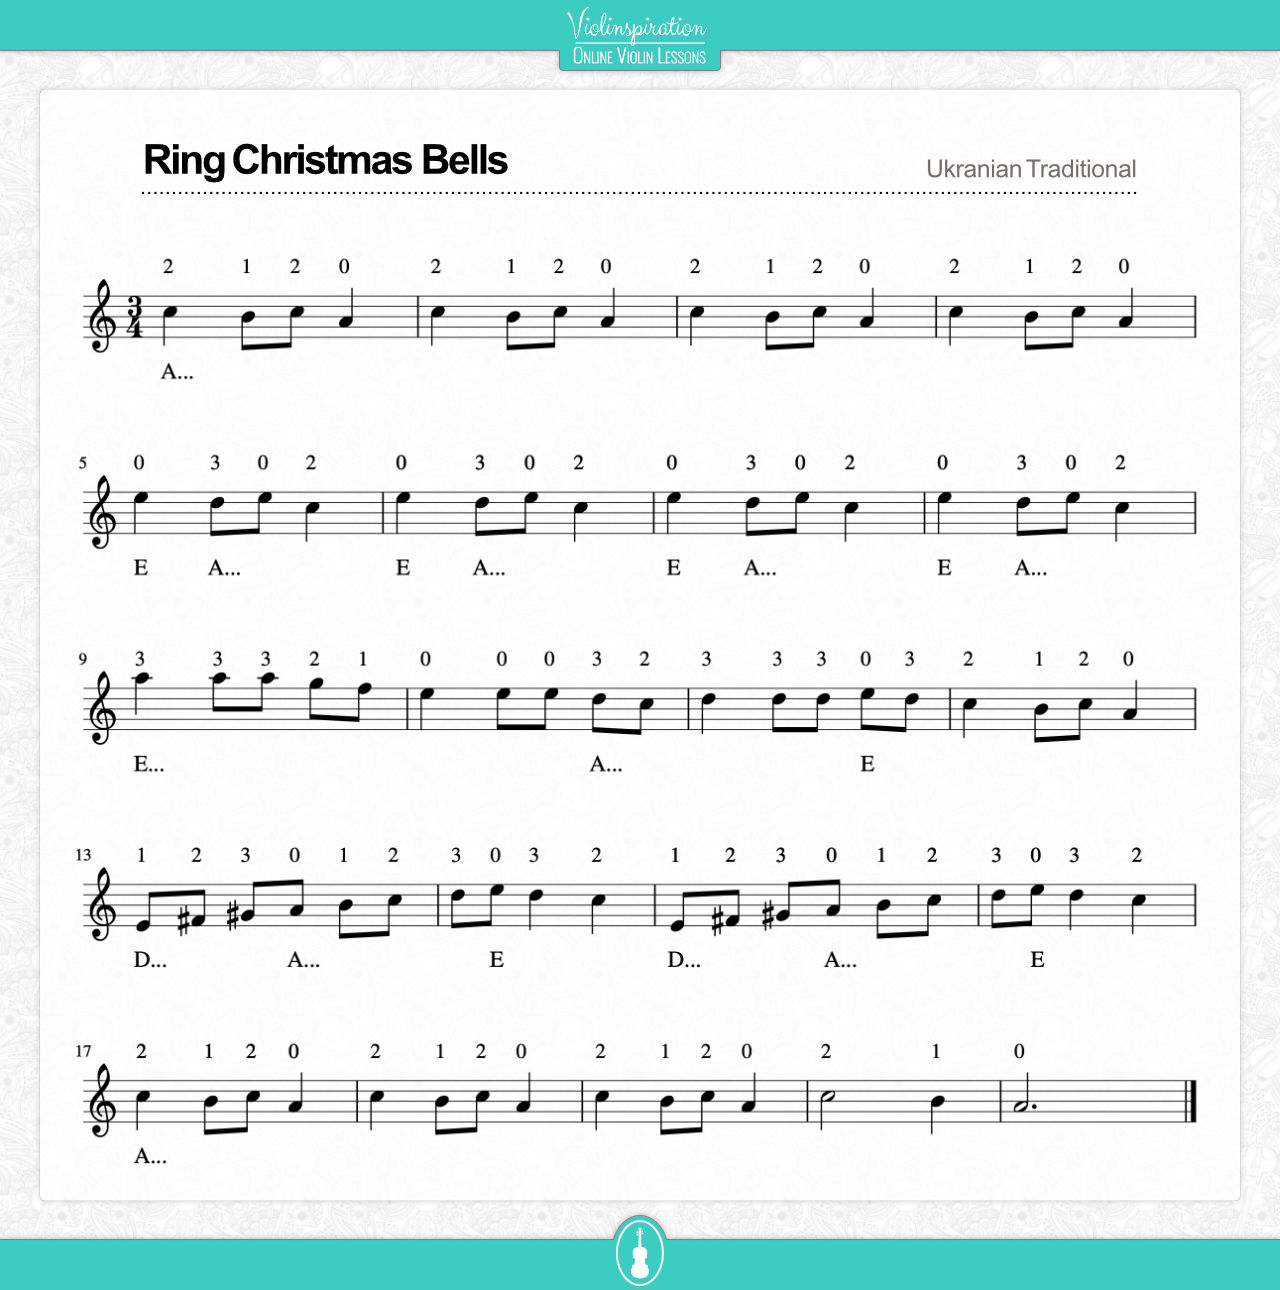 Ring, Christmas bells [and] Christmas carol - PICRYL - Public Domain Media  Search Engine Public Domain Search